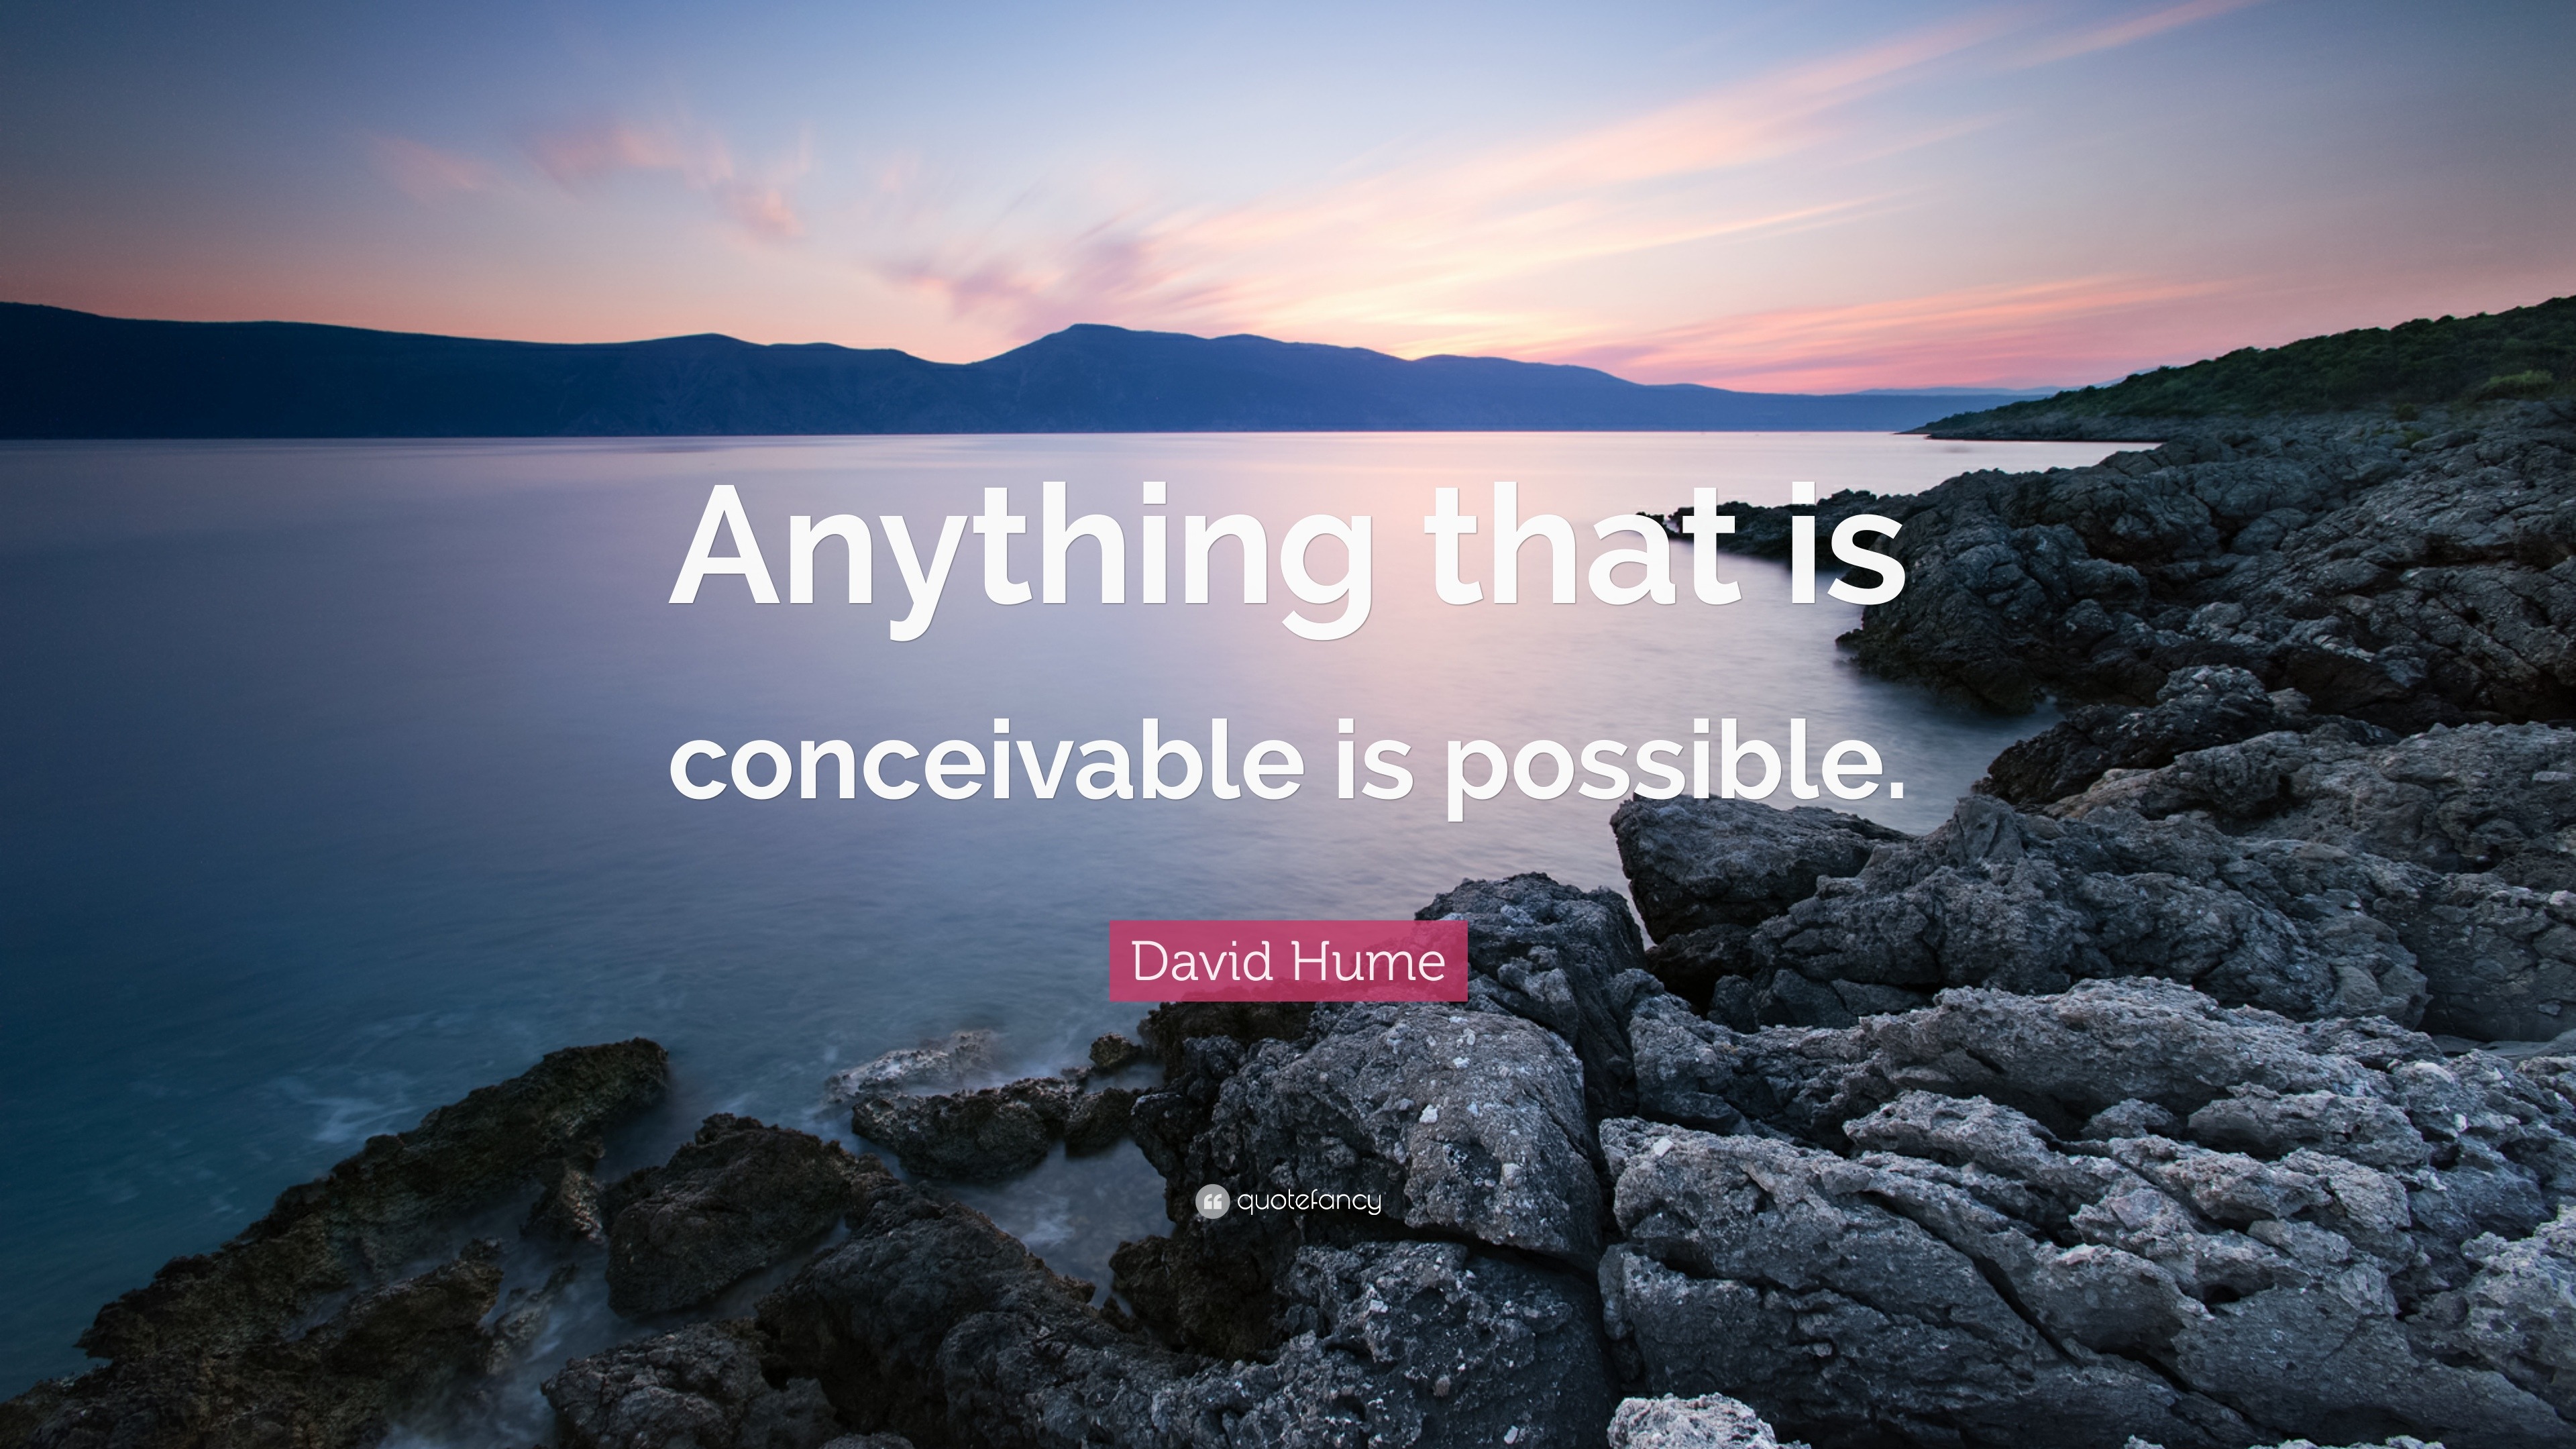 David Hume Quote: “Anything that is conceivable is possible.”